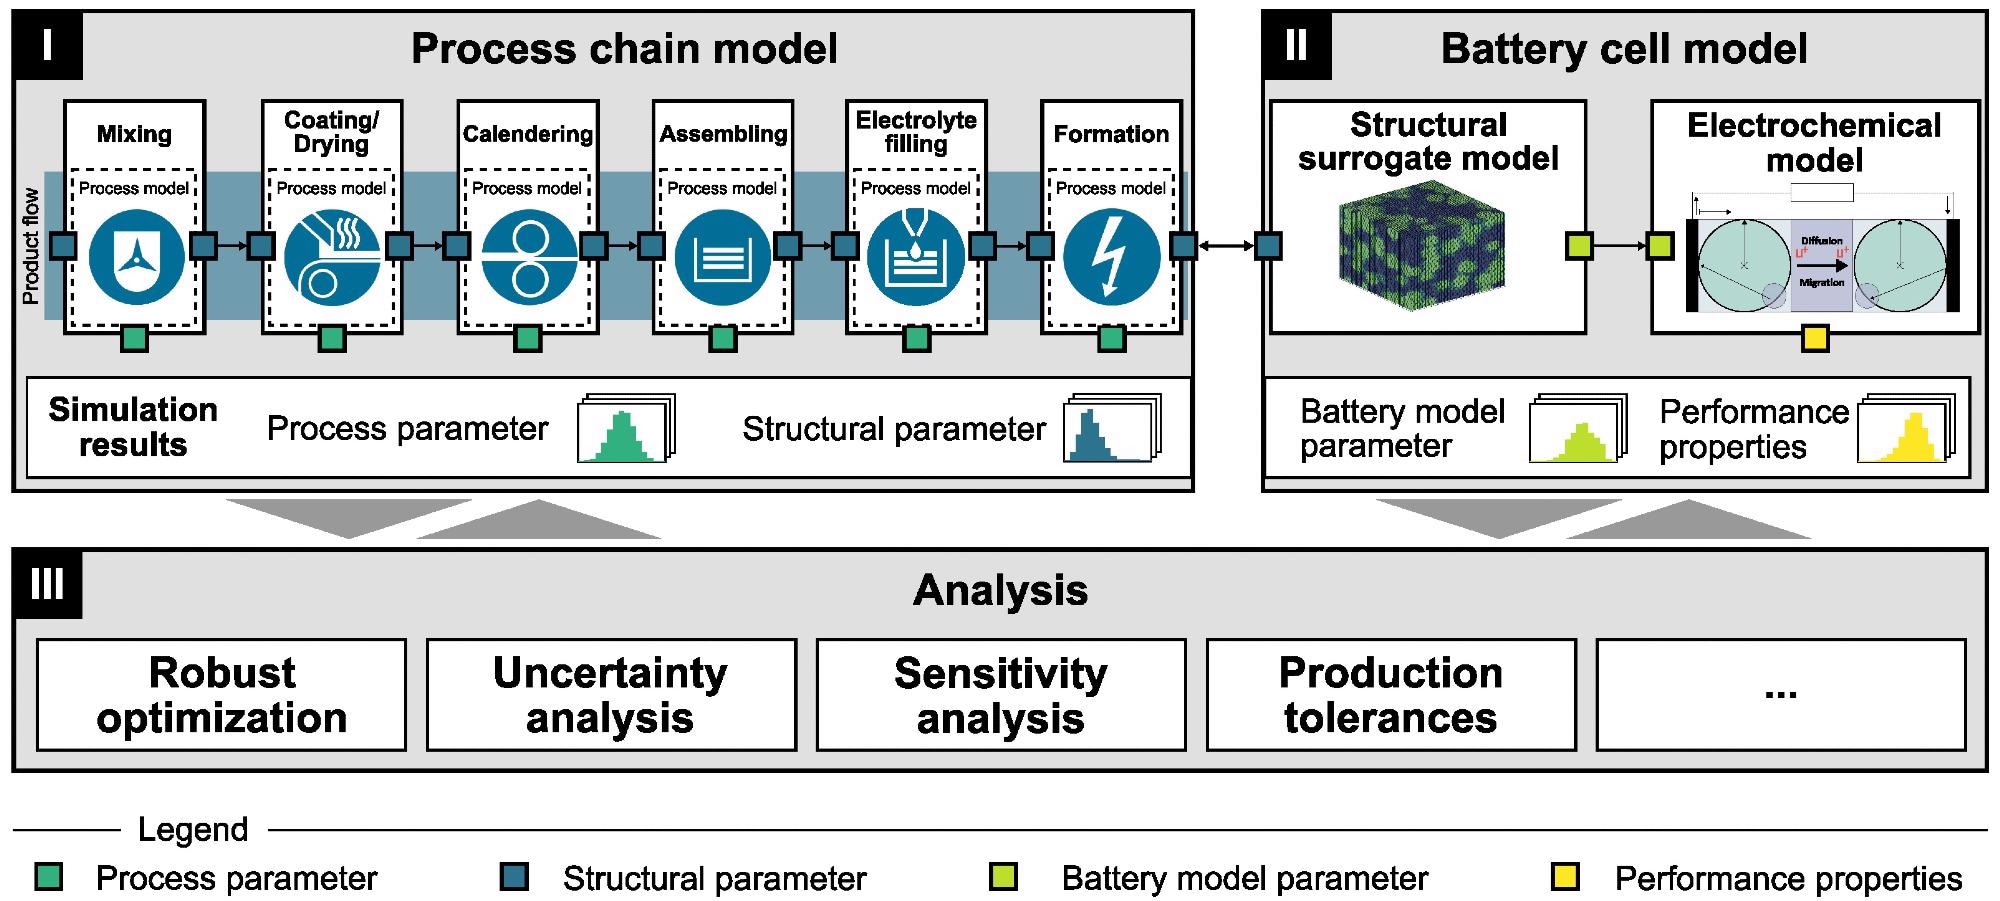 Schematic concept of the modeling framework consisting of three modules: (I) process chain model, (II) battery cell model, and (III) analysis.